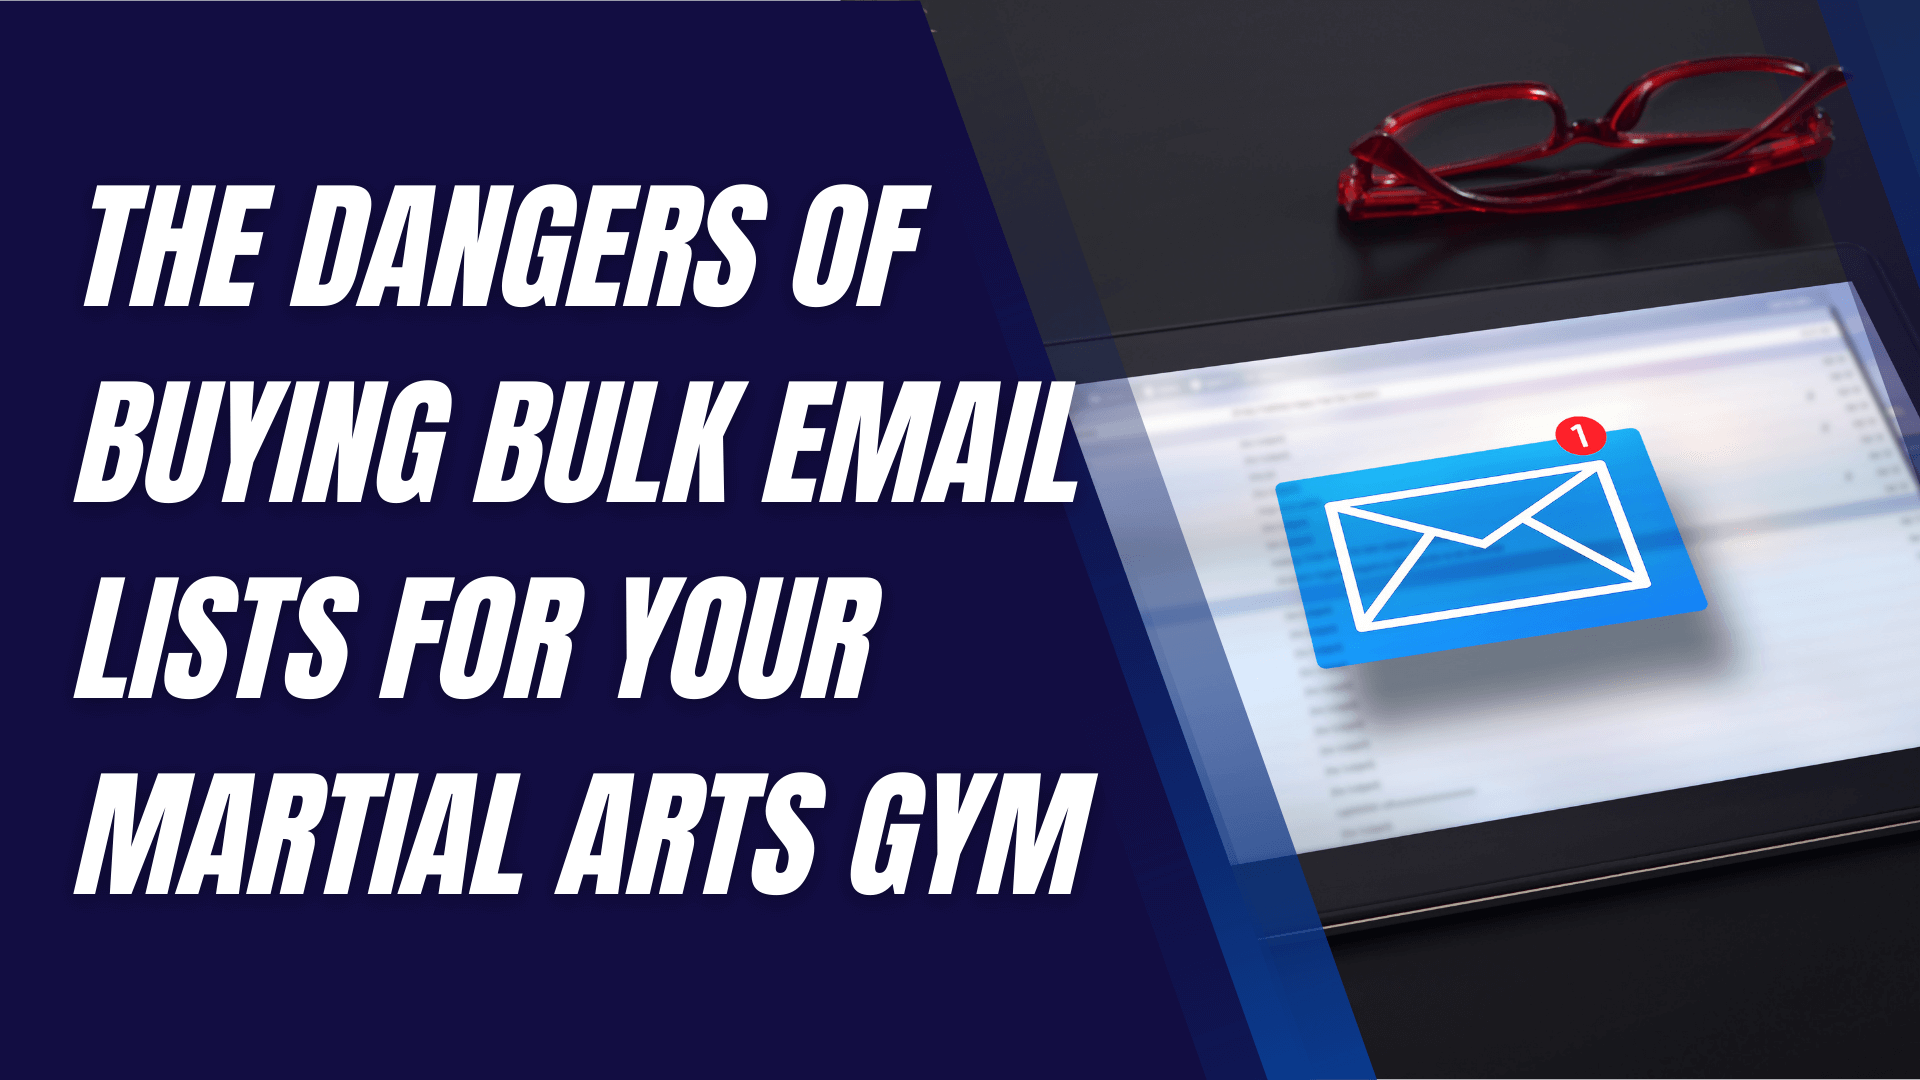 The Dangers of Buying Bulk Email Lists for Your Martial Arts Gym: A Guide for Aspiring Business Owne